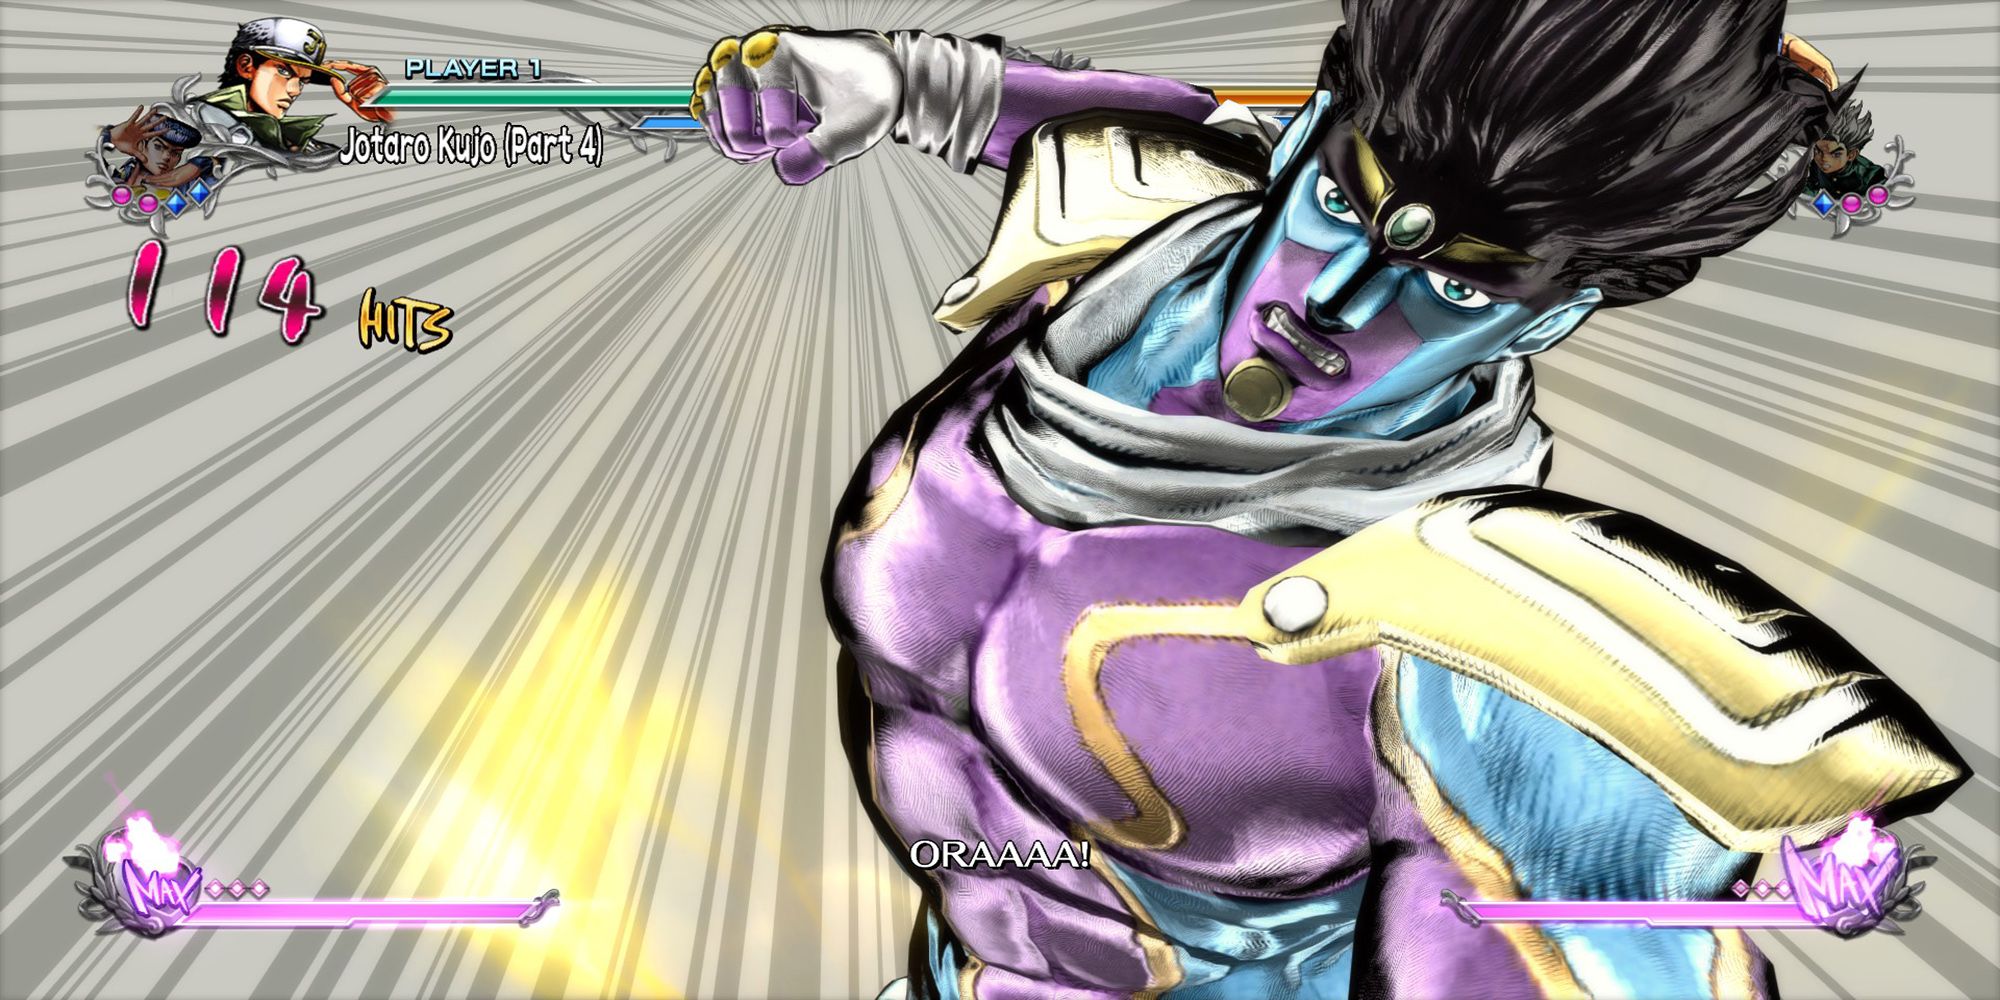 Star Platinum charges in for the kill during a Great Heart Attack in Jojo's Bizarre Adventure ASBR.